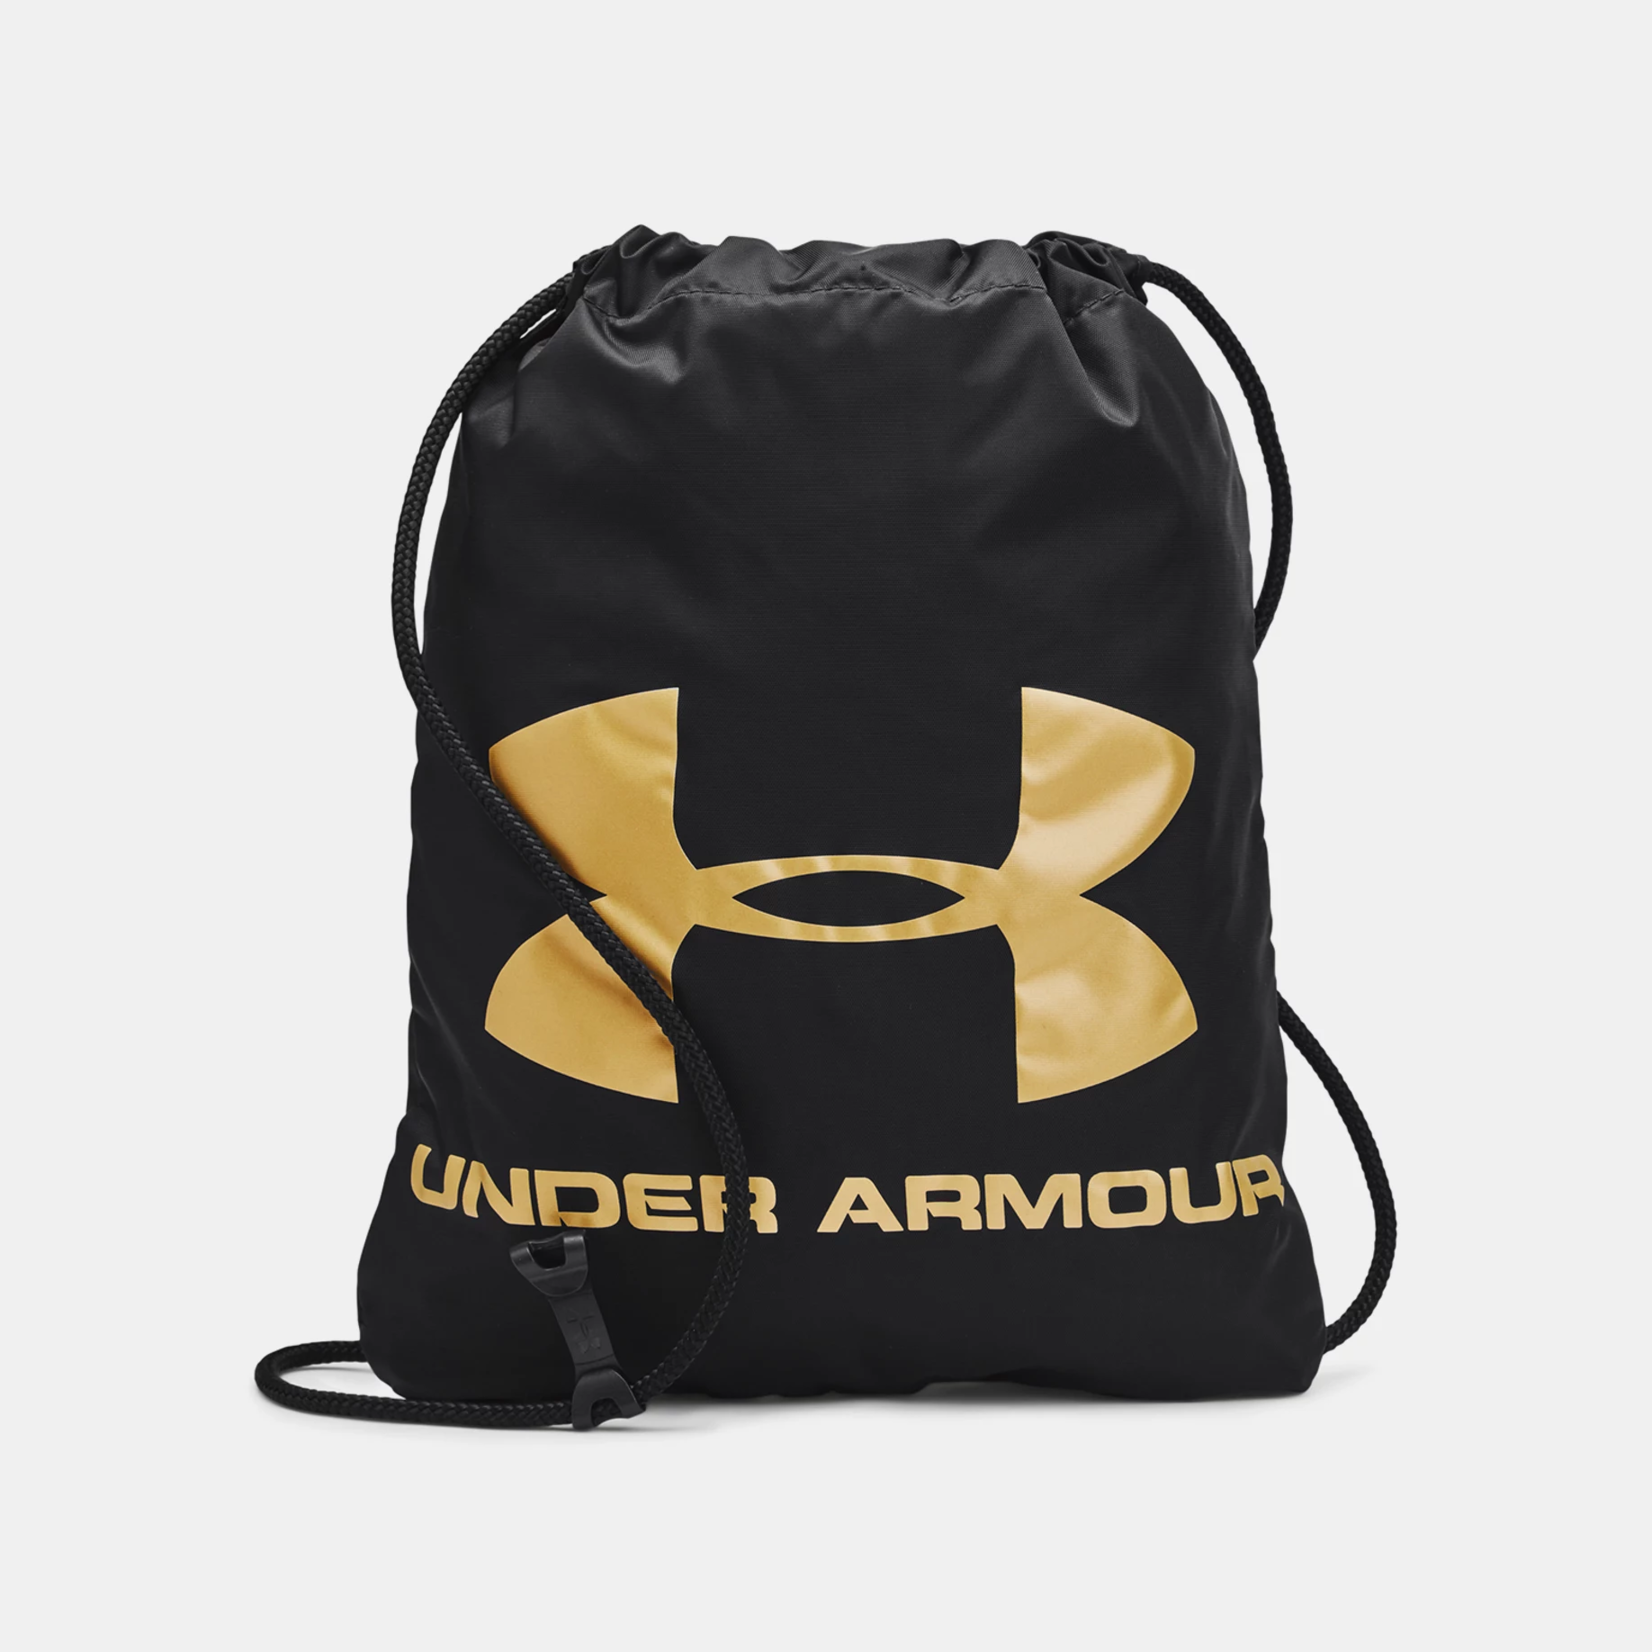 Under Armour Under Armour Sackpack, Ozsee, OS